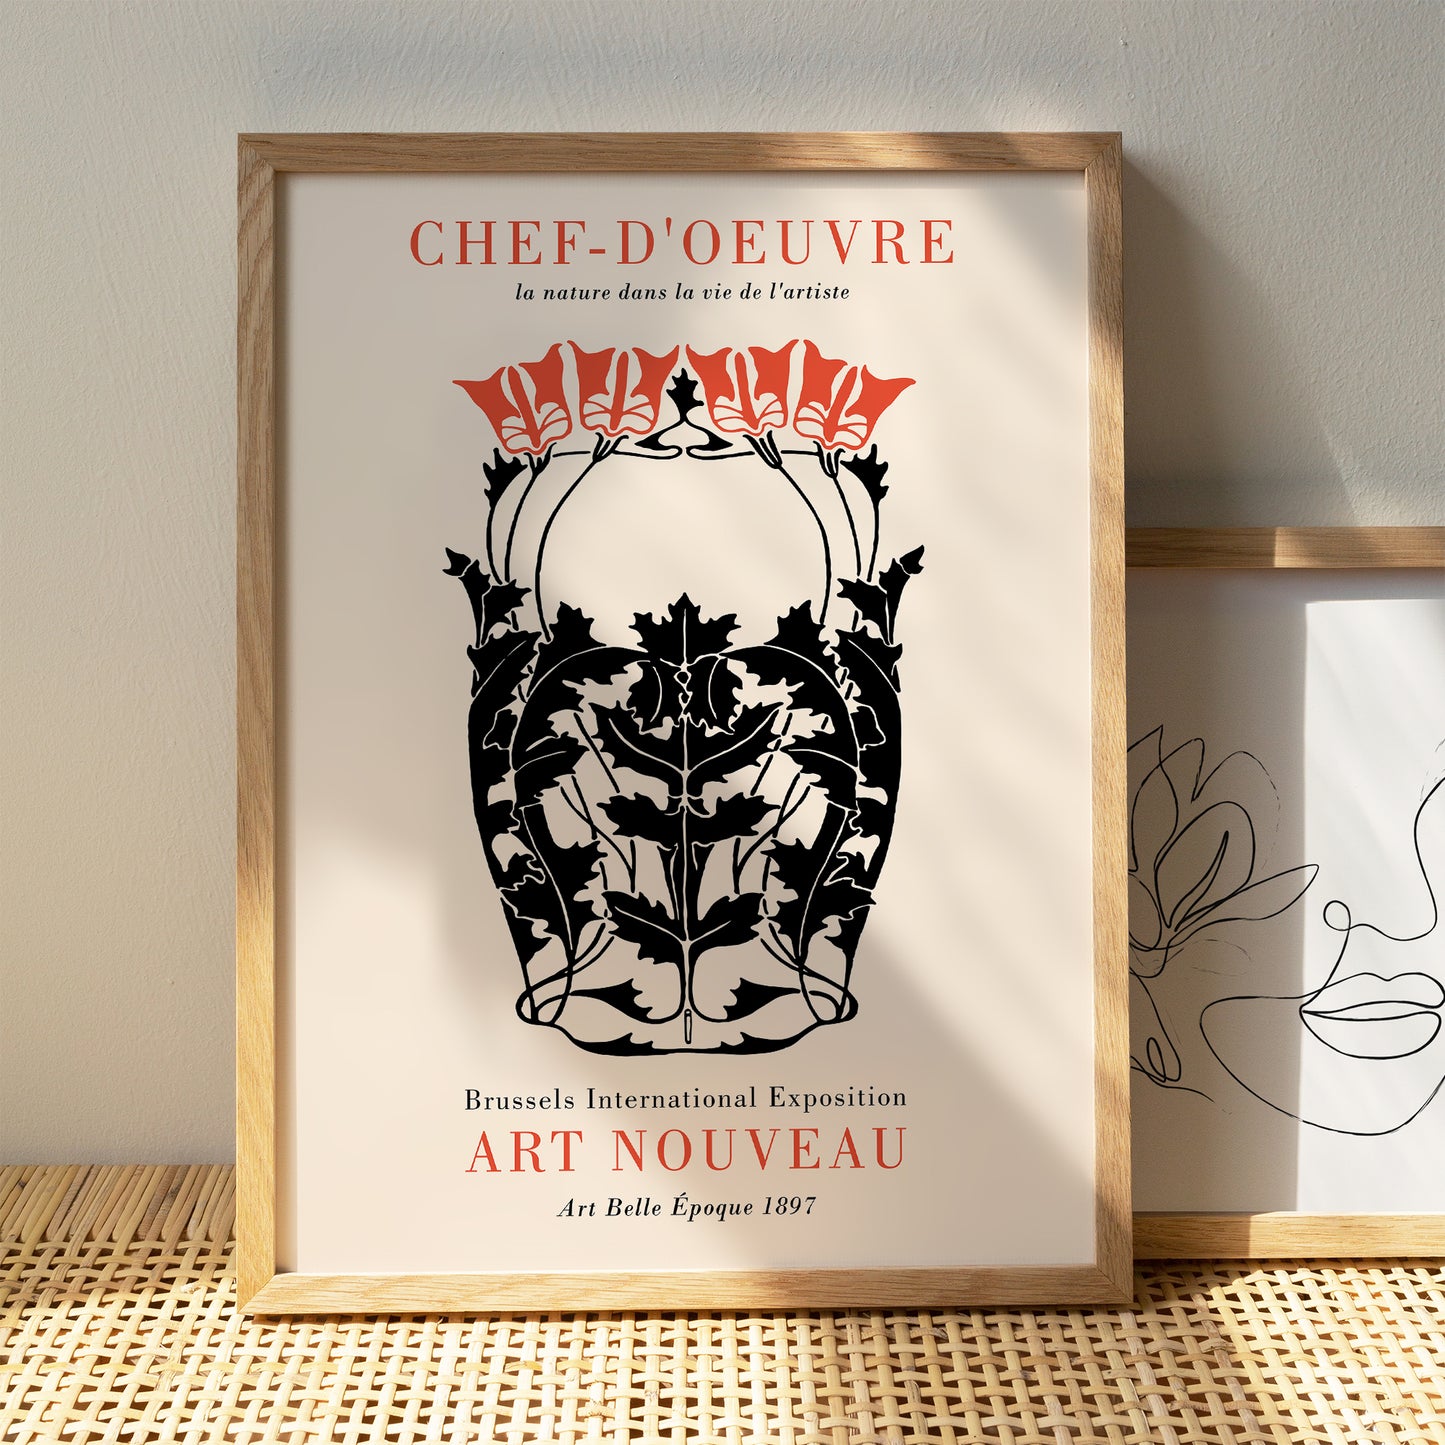 Chef-D'Oeuvre Print